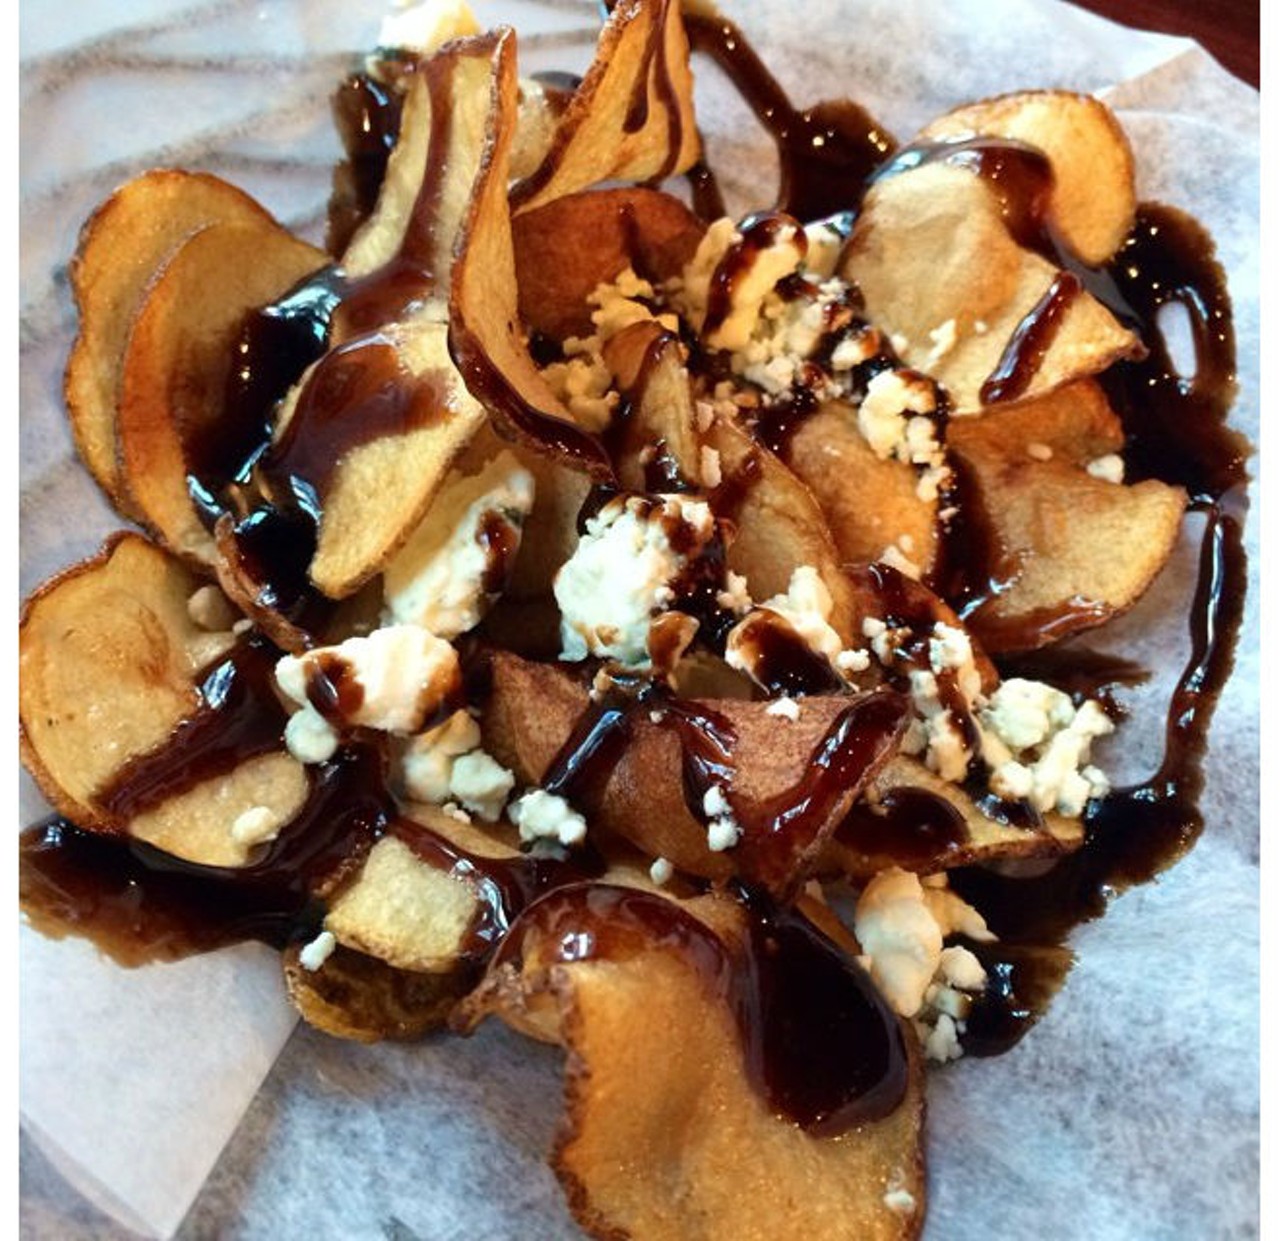 Black and bleu chips from Nona Tap Room: house-made potato chips with balsamic glaze and bleu cheese crumbles (via Instagram user @nique_eats)